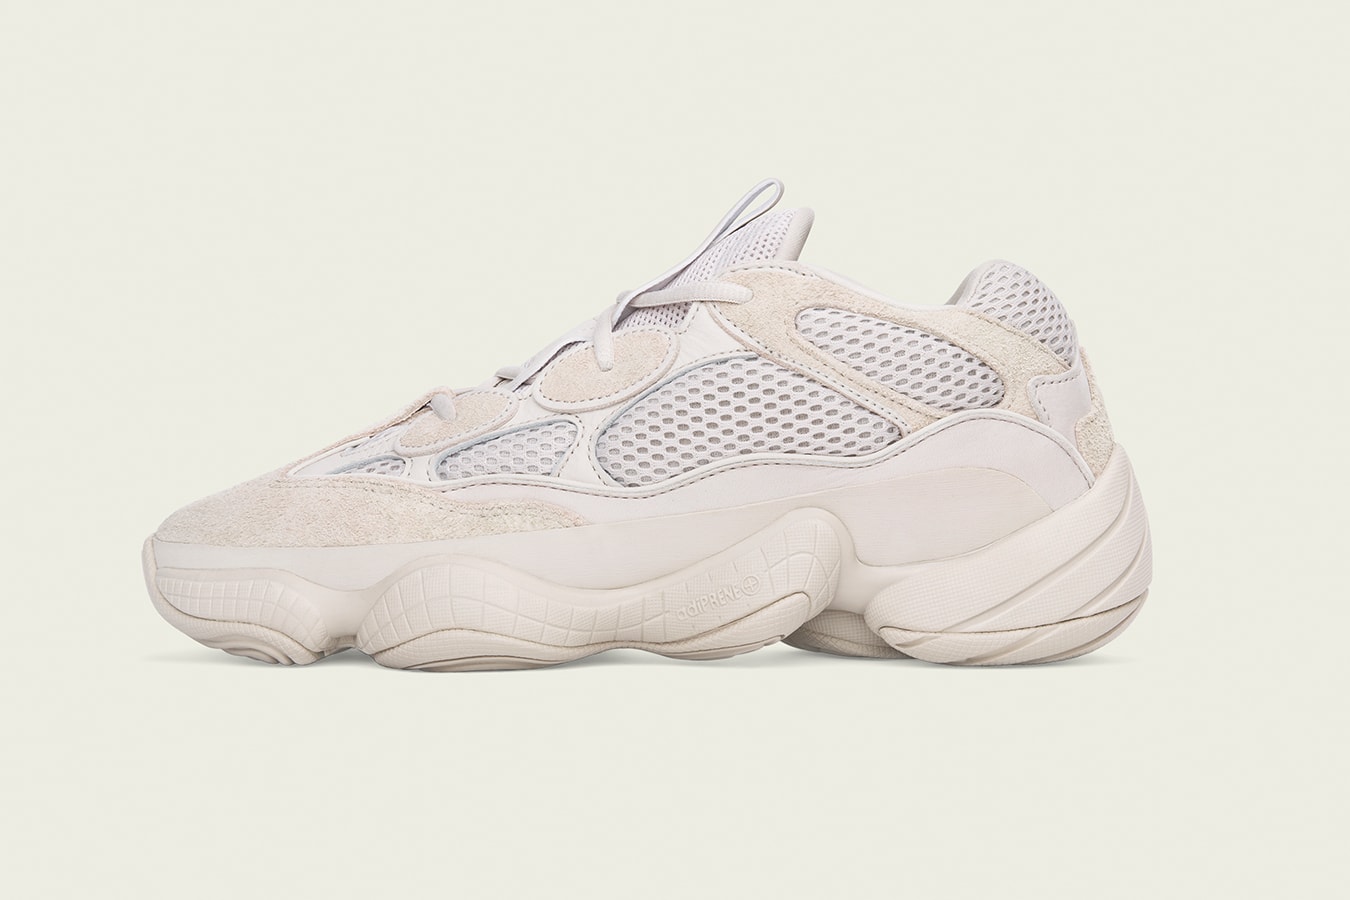 adidas Originals YEEZY 500 Blush Kanye West adidas Sneakers Shoes Release Date Info Drops February 14 16 17 2018 Los Angeles 747 Warehouse Street Confirmed App